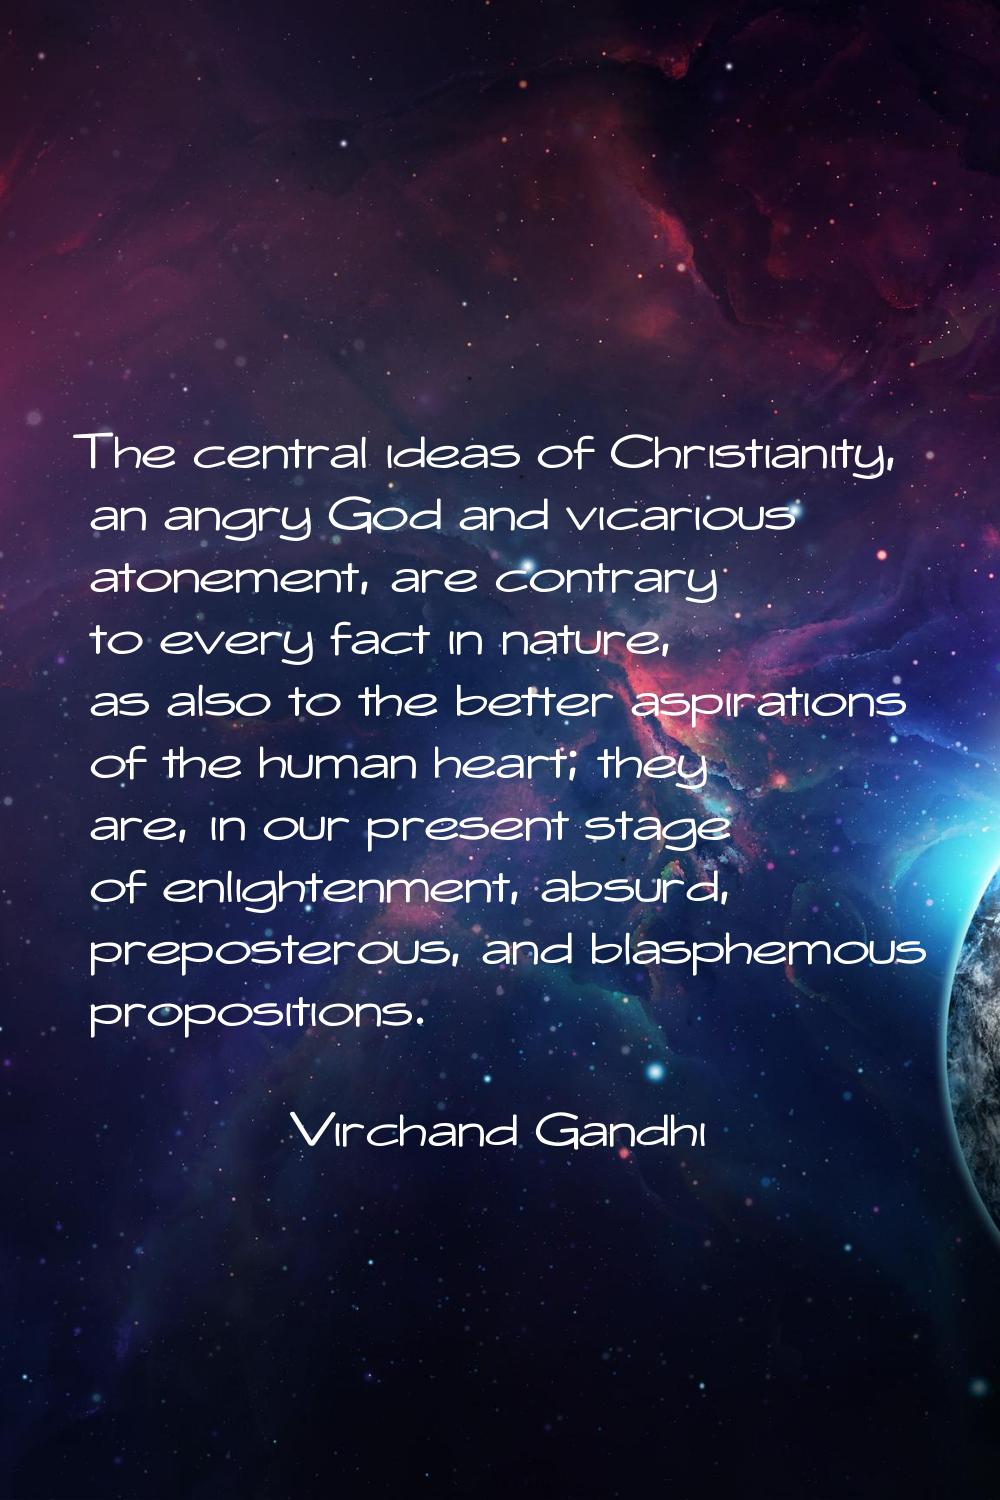 The central ideas of Christianity, an angry God and vicarious atonement, are contrary to every fact